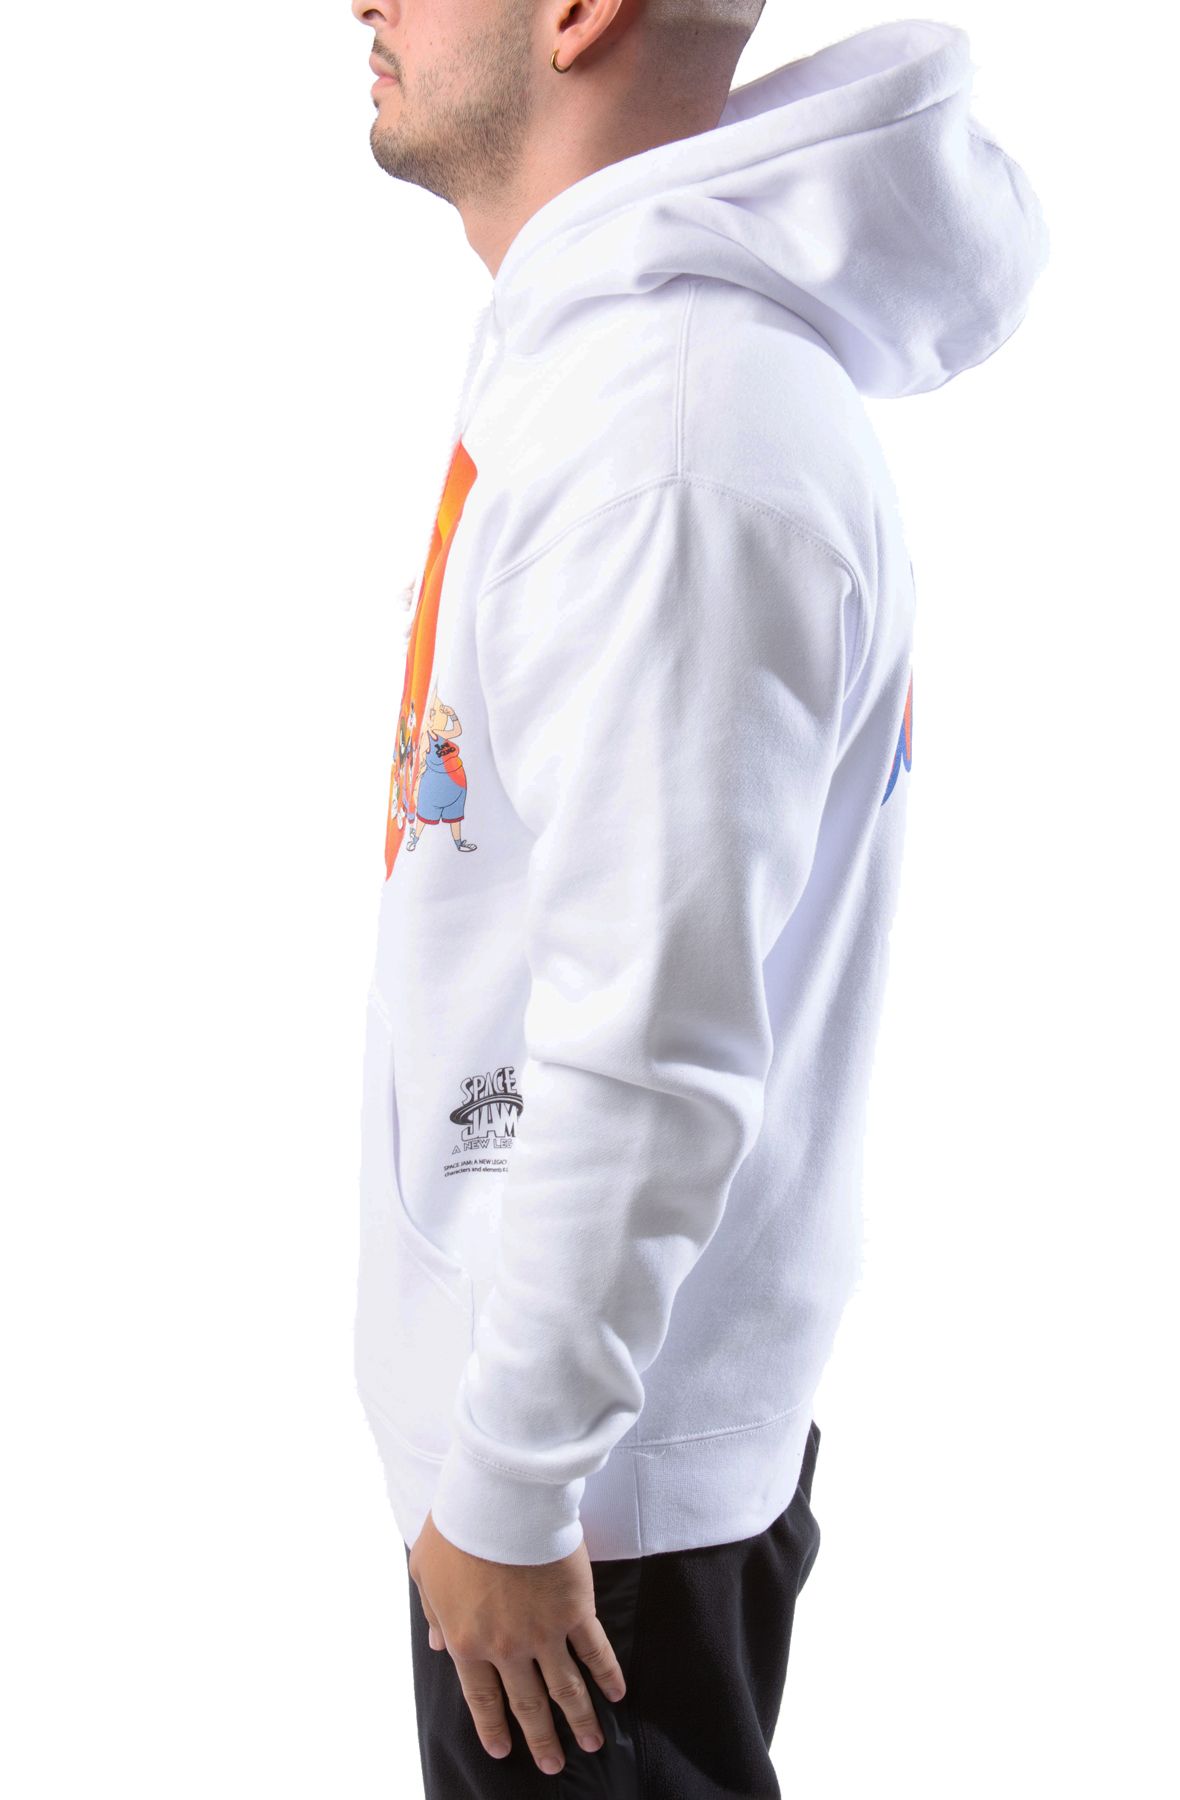 MITCHELL AND NESS Space Jam 2 Shadow Pullover Hoodie BMPHDX21048 